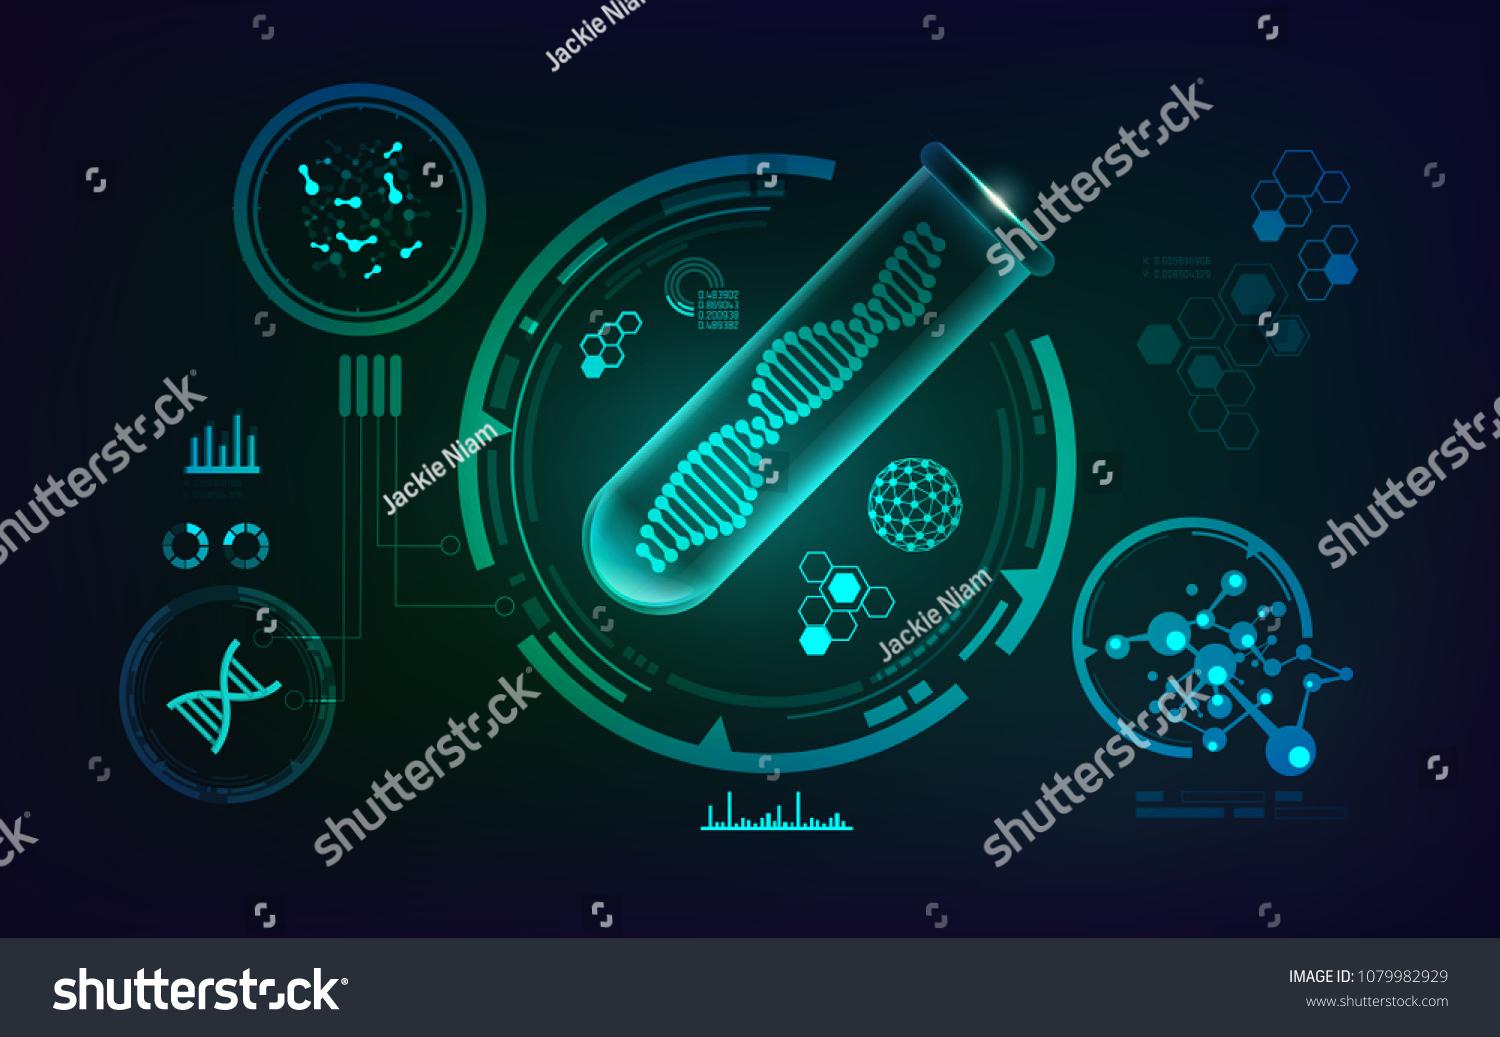 Geic Engineering Image Browse Stock Photos Vectors